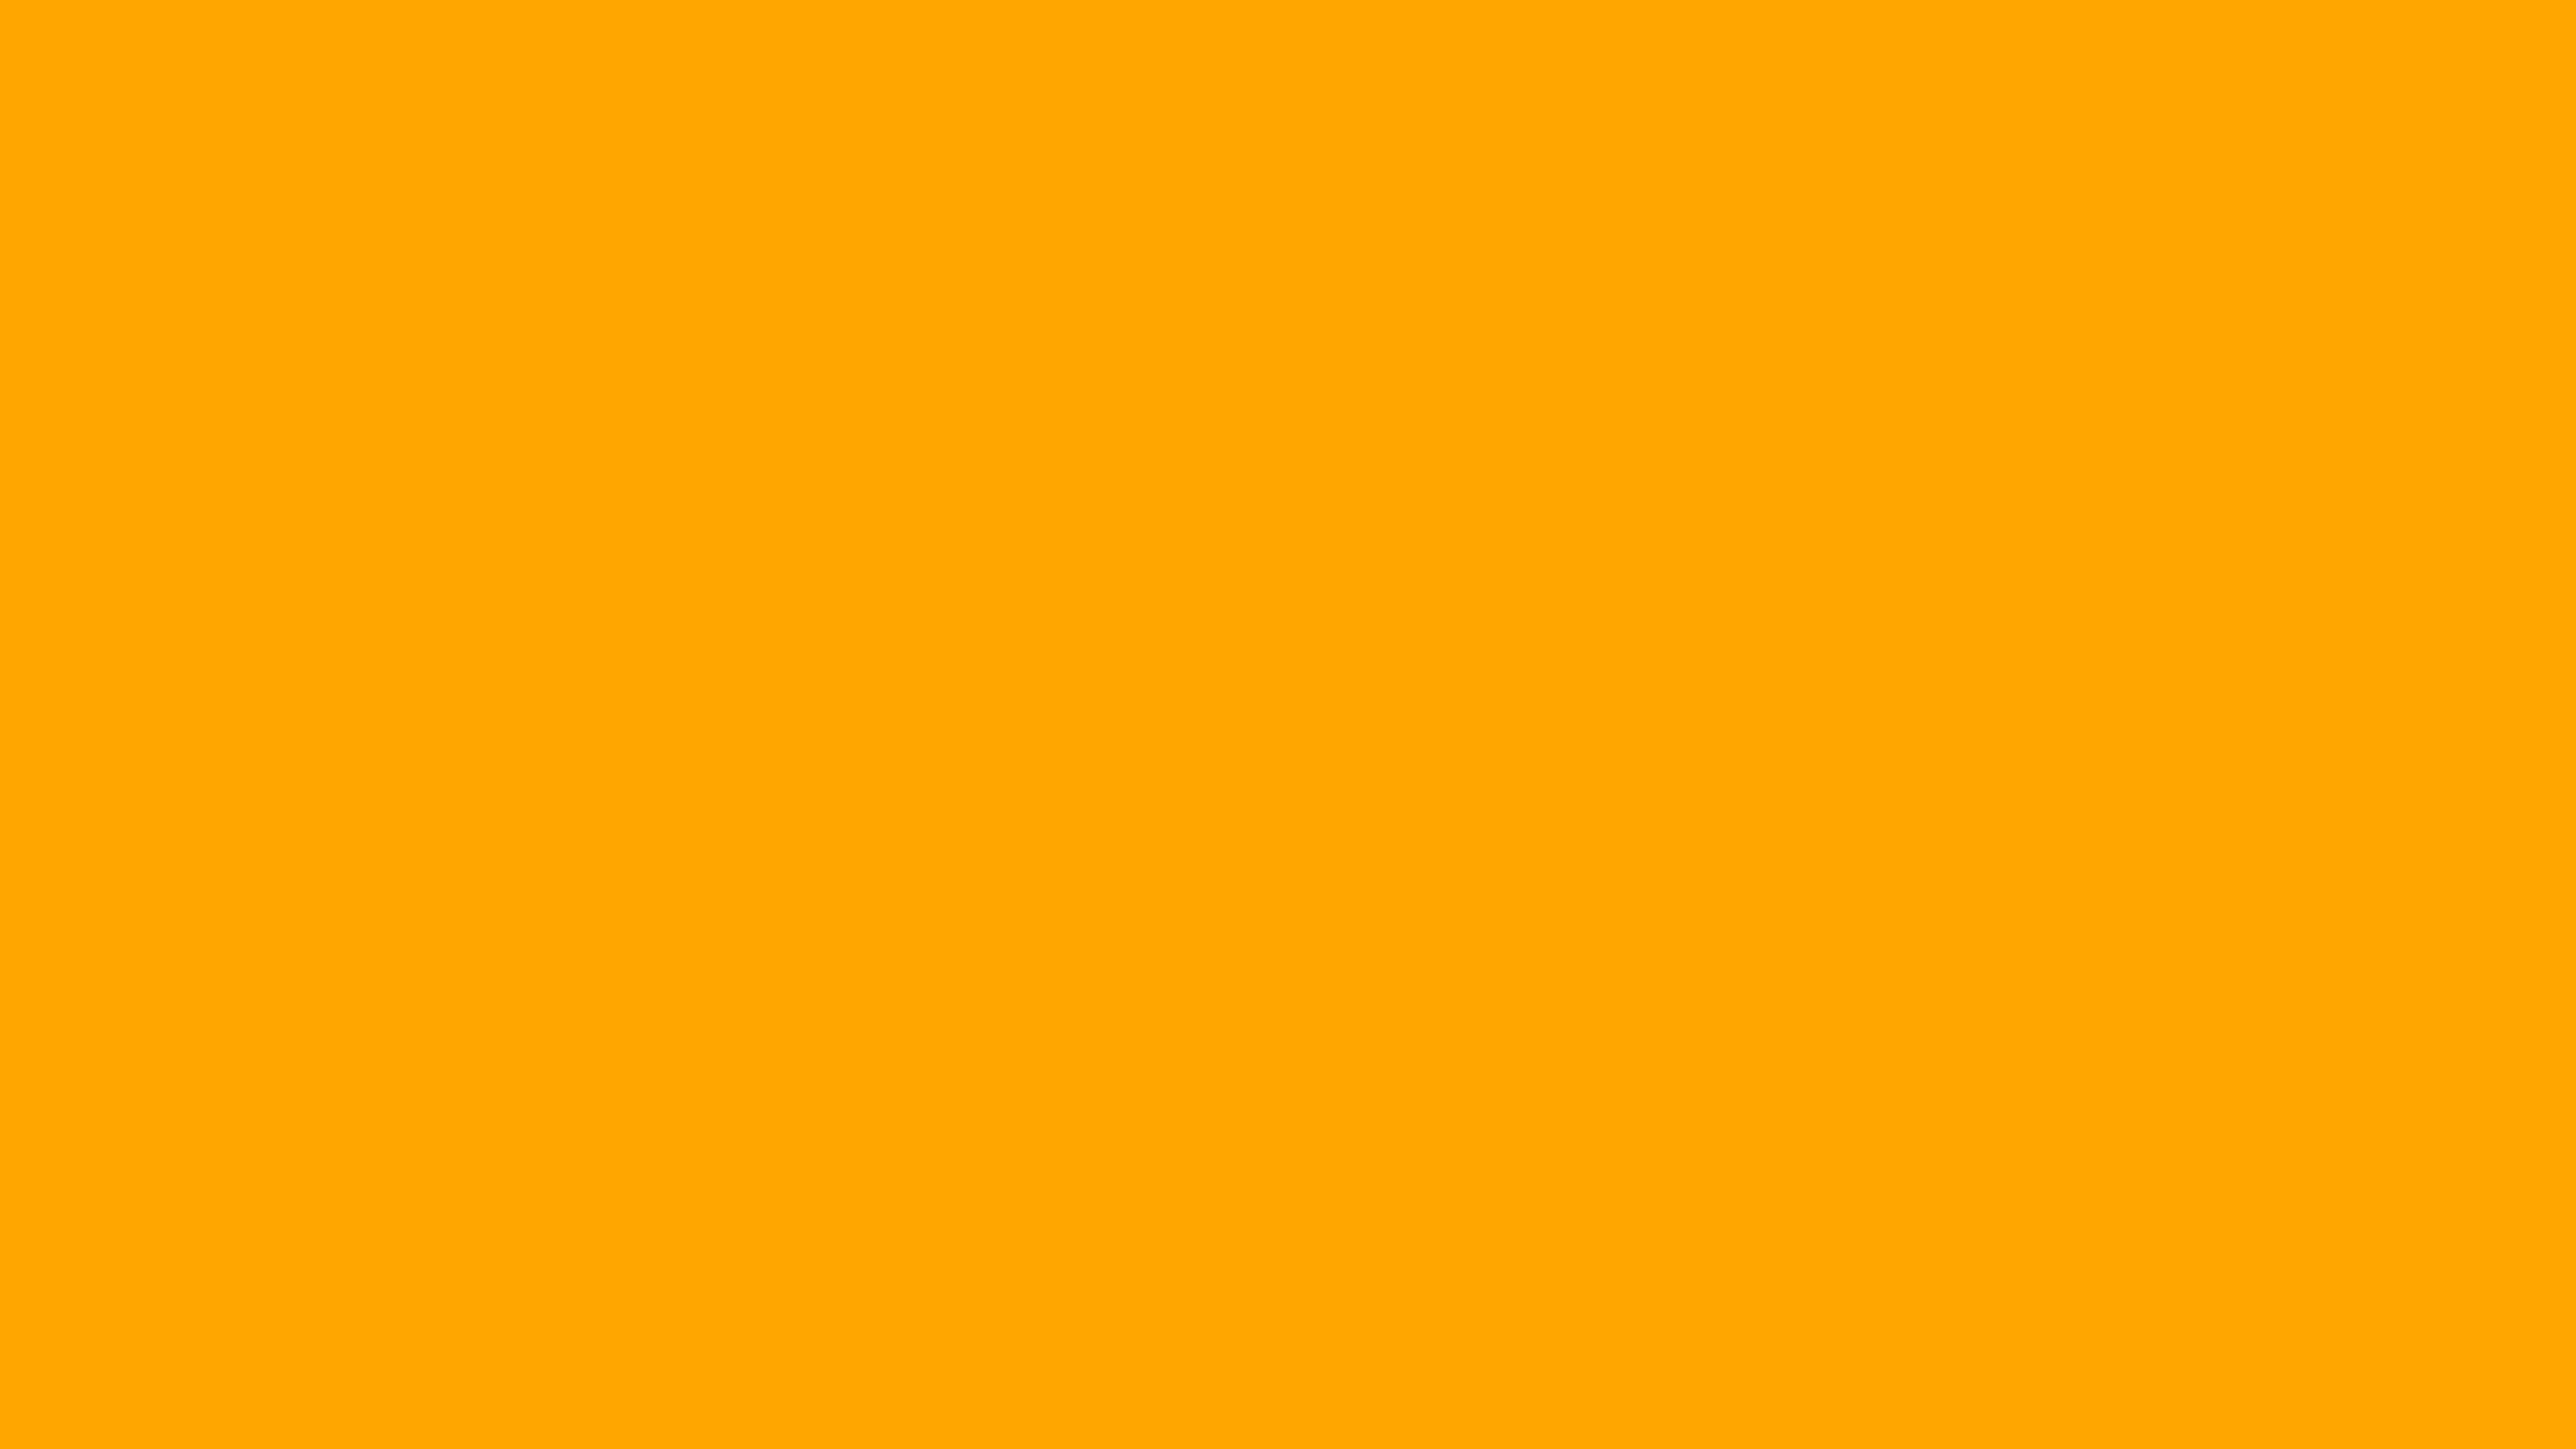 7680x4320 Chrome Yellow Solid Color Background